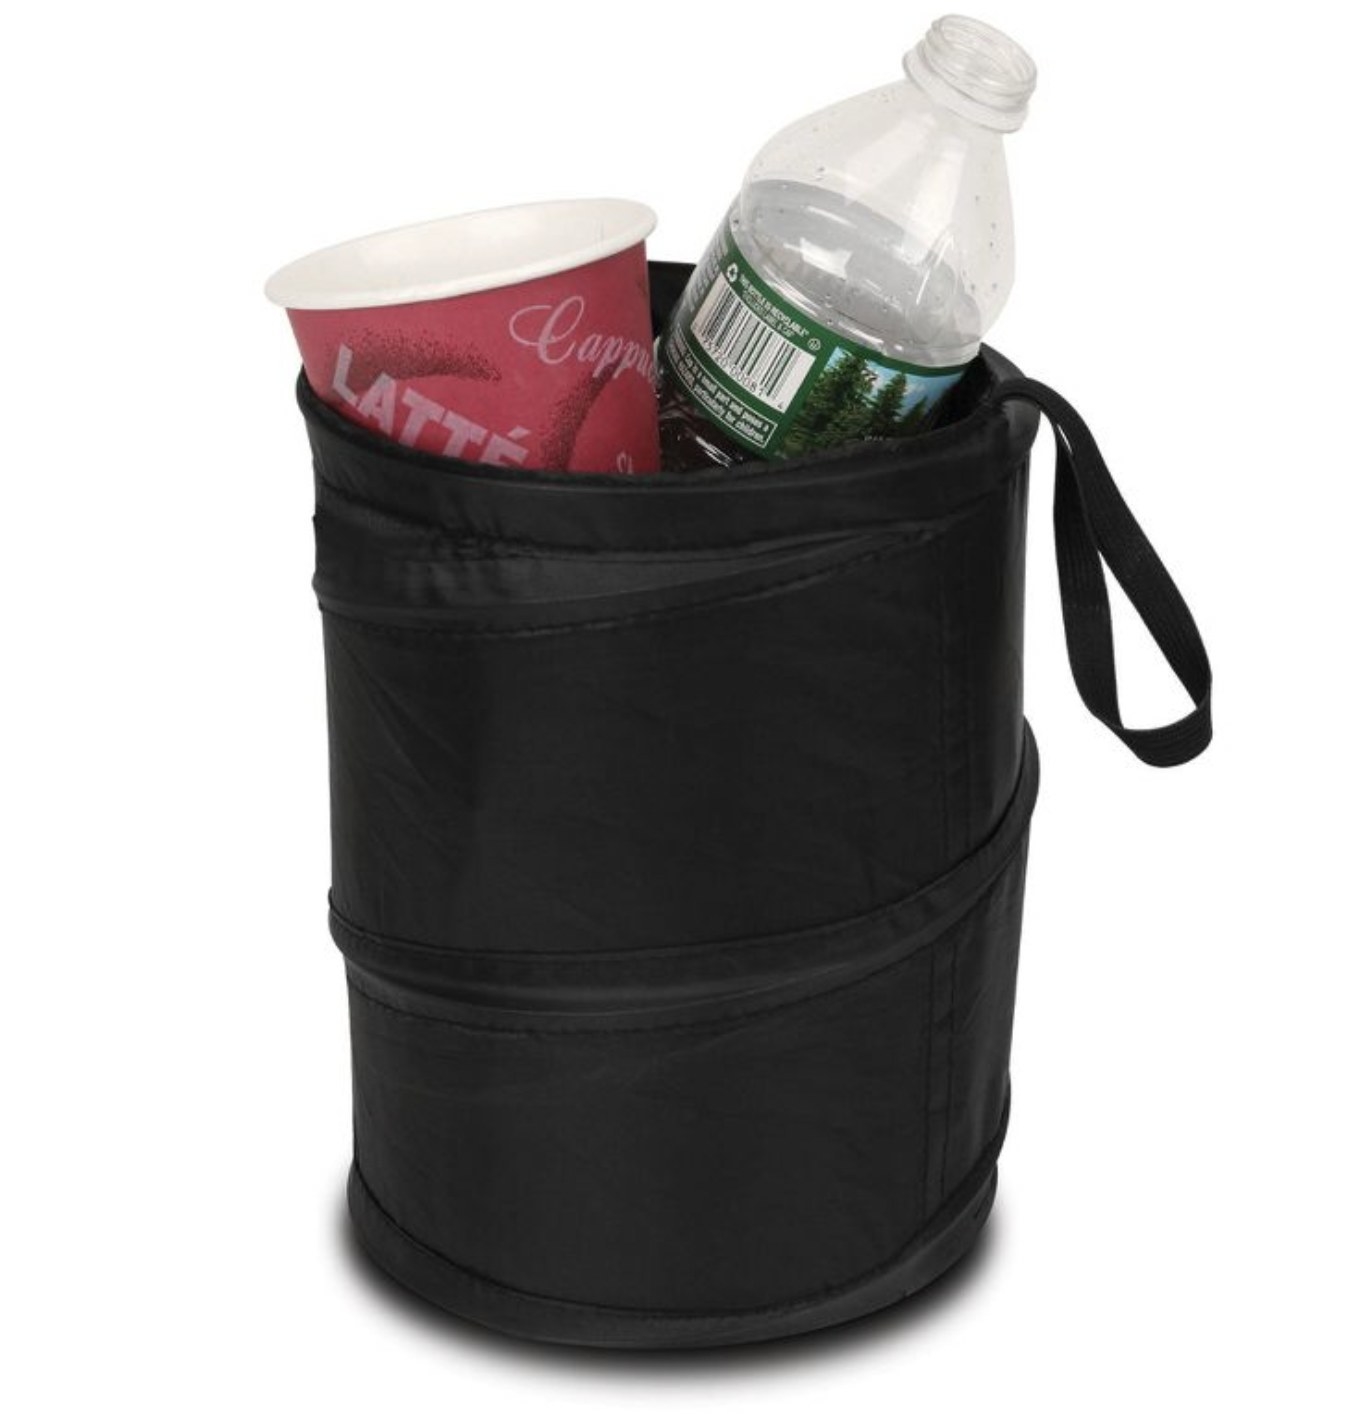 The black pop-up trash can holding plastic water bottle and coffee cup